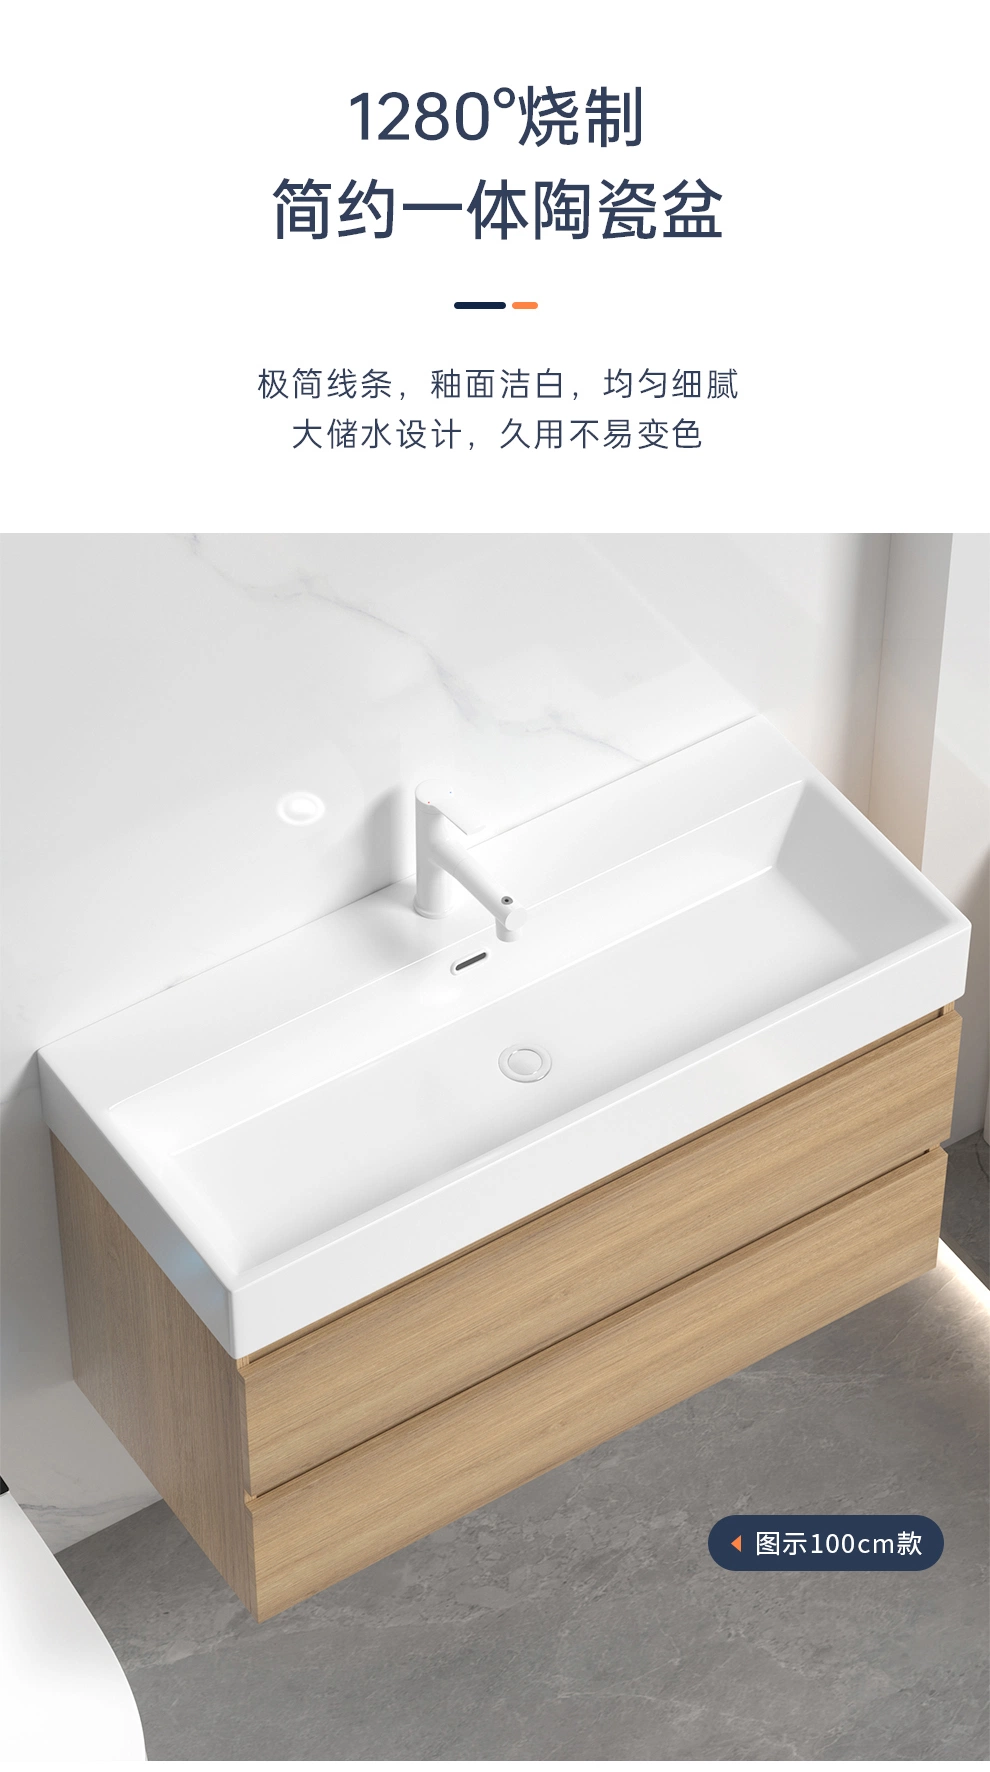 Burlywood Color Bathroom Luxury Cabinets with Ceramic Basin Smart Mirror 50~100mm Size Wall Hung Mounted Bathroom Cabinet